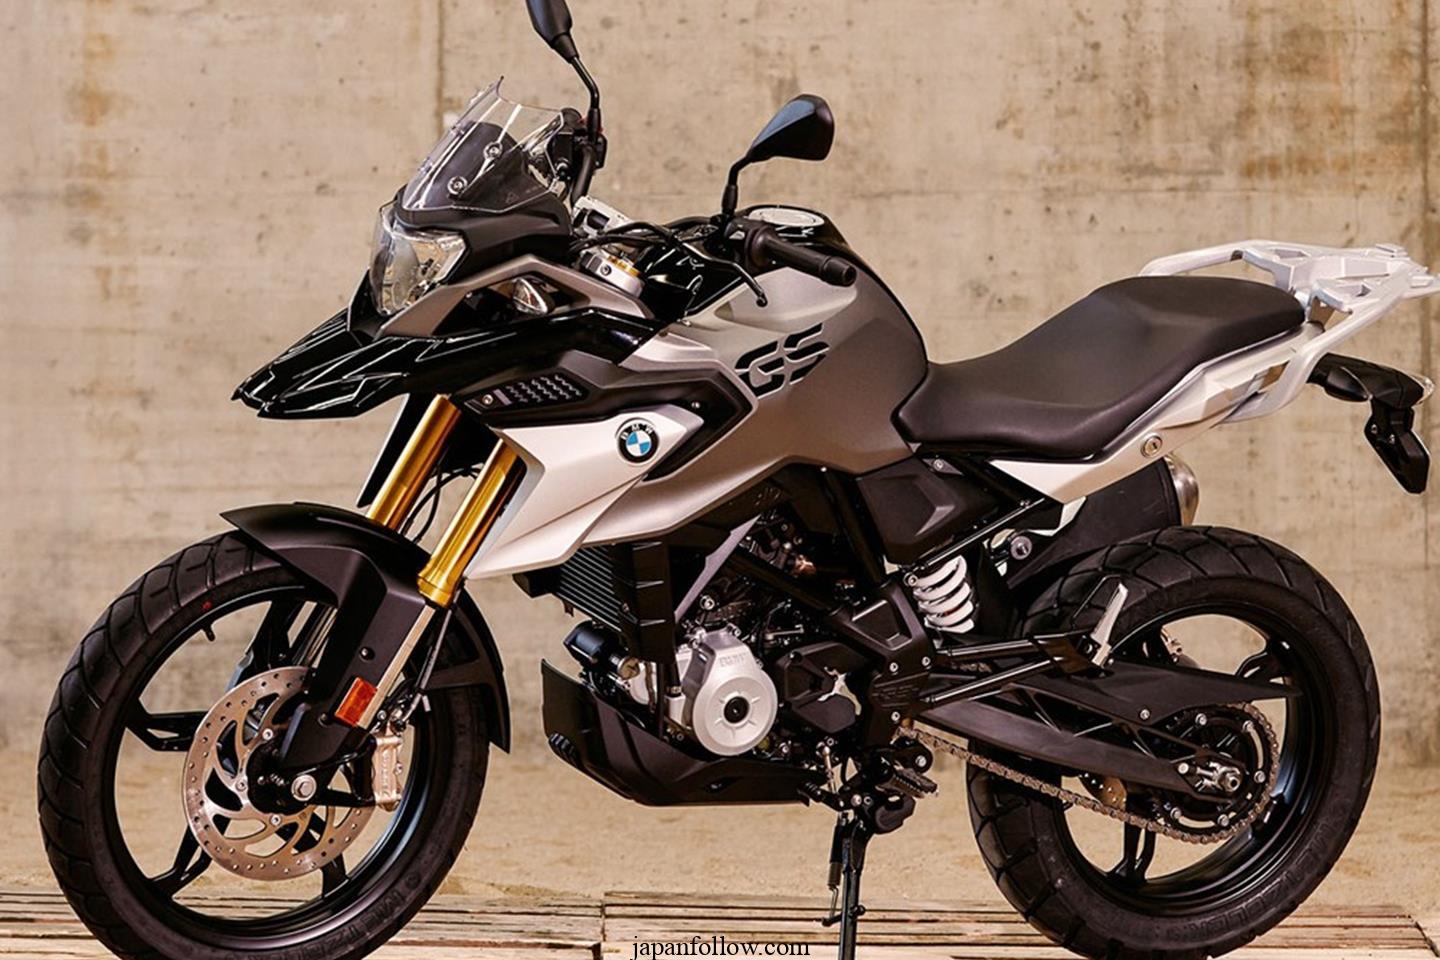 Review of BMW G310gs [specs Review]